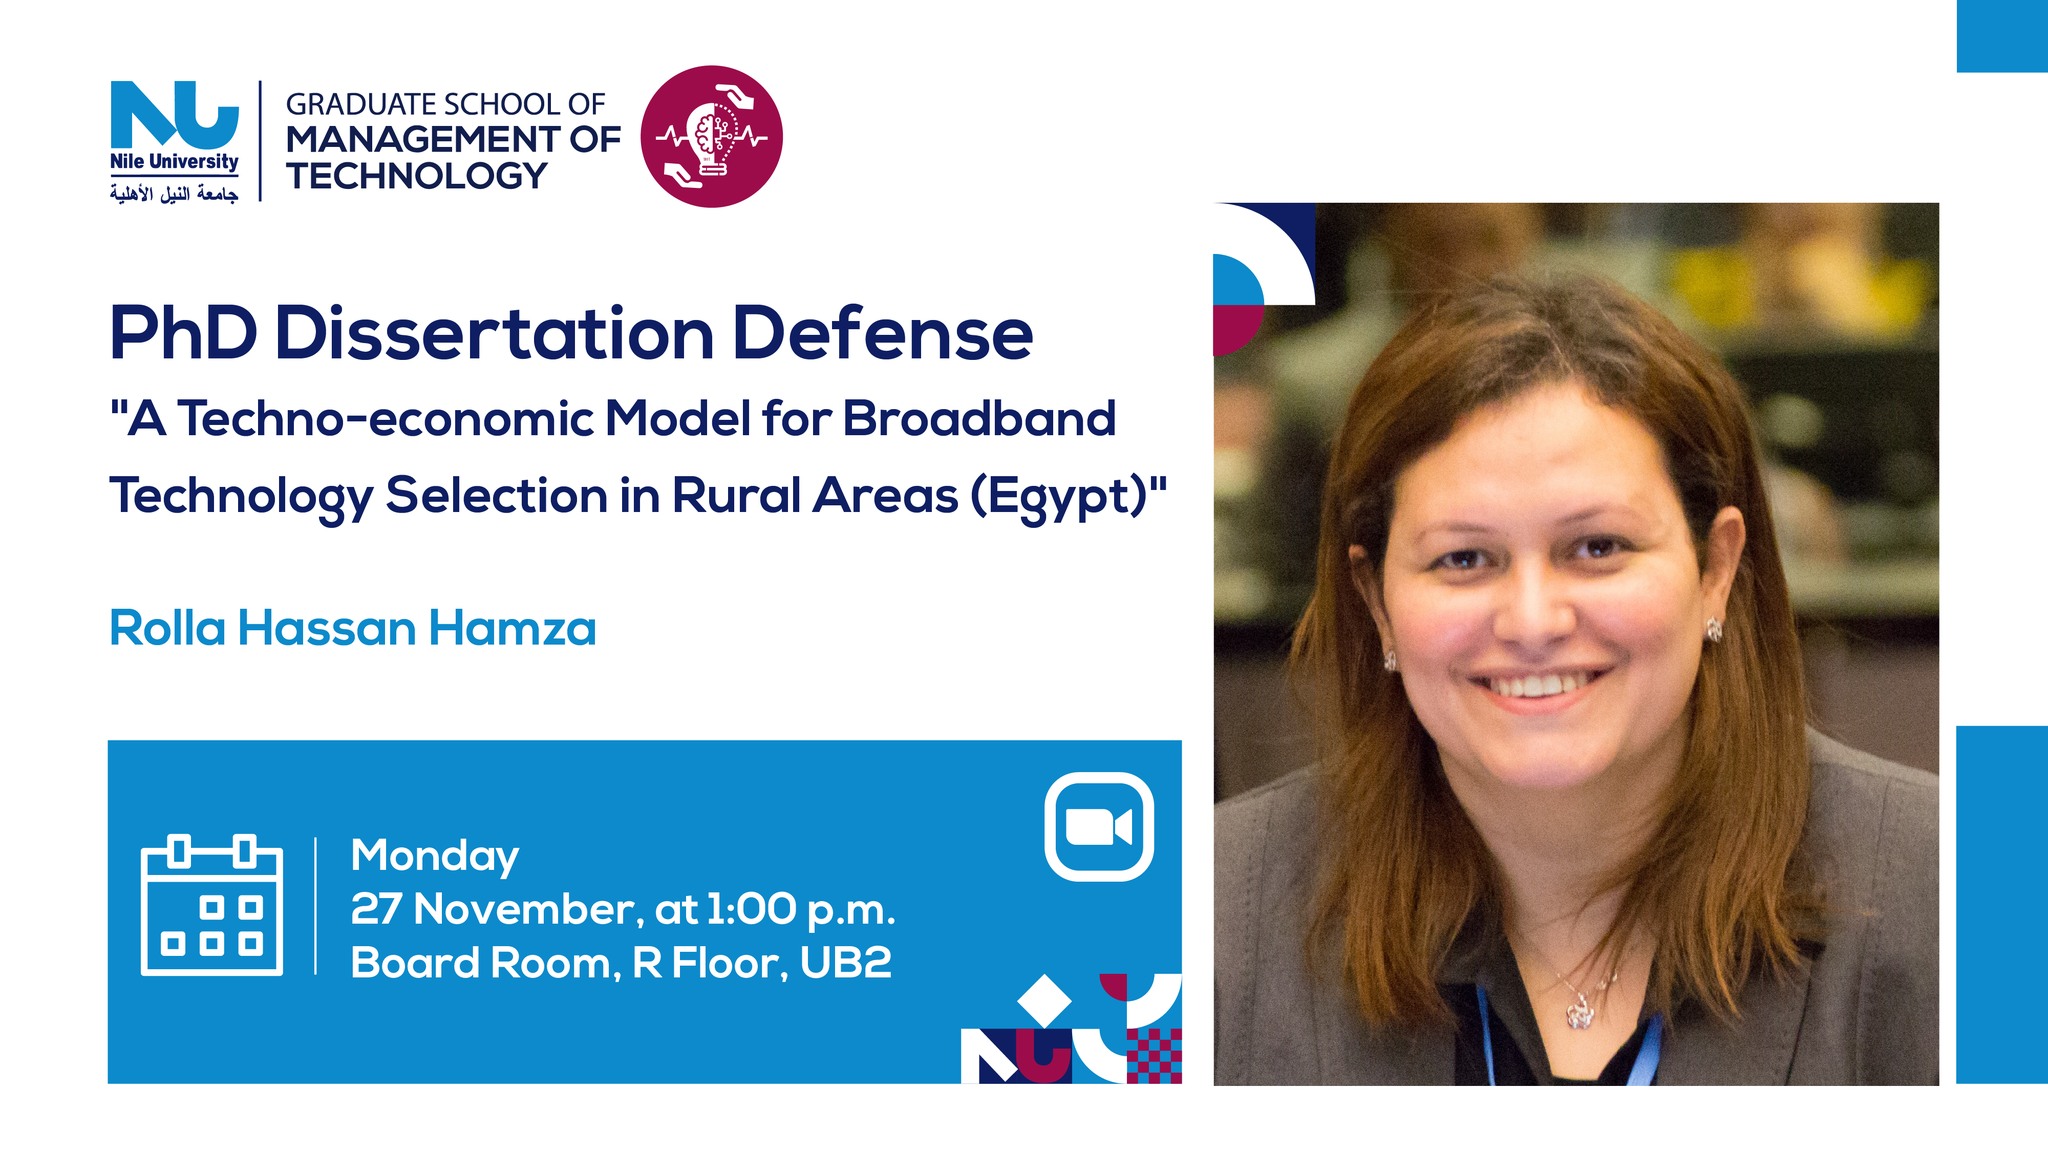 A Techno-economic Model for Broadband Technology Selection in Rural Areas (Egypt)